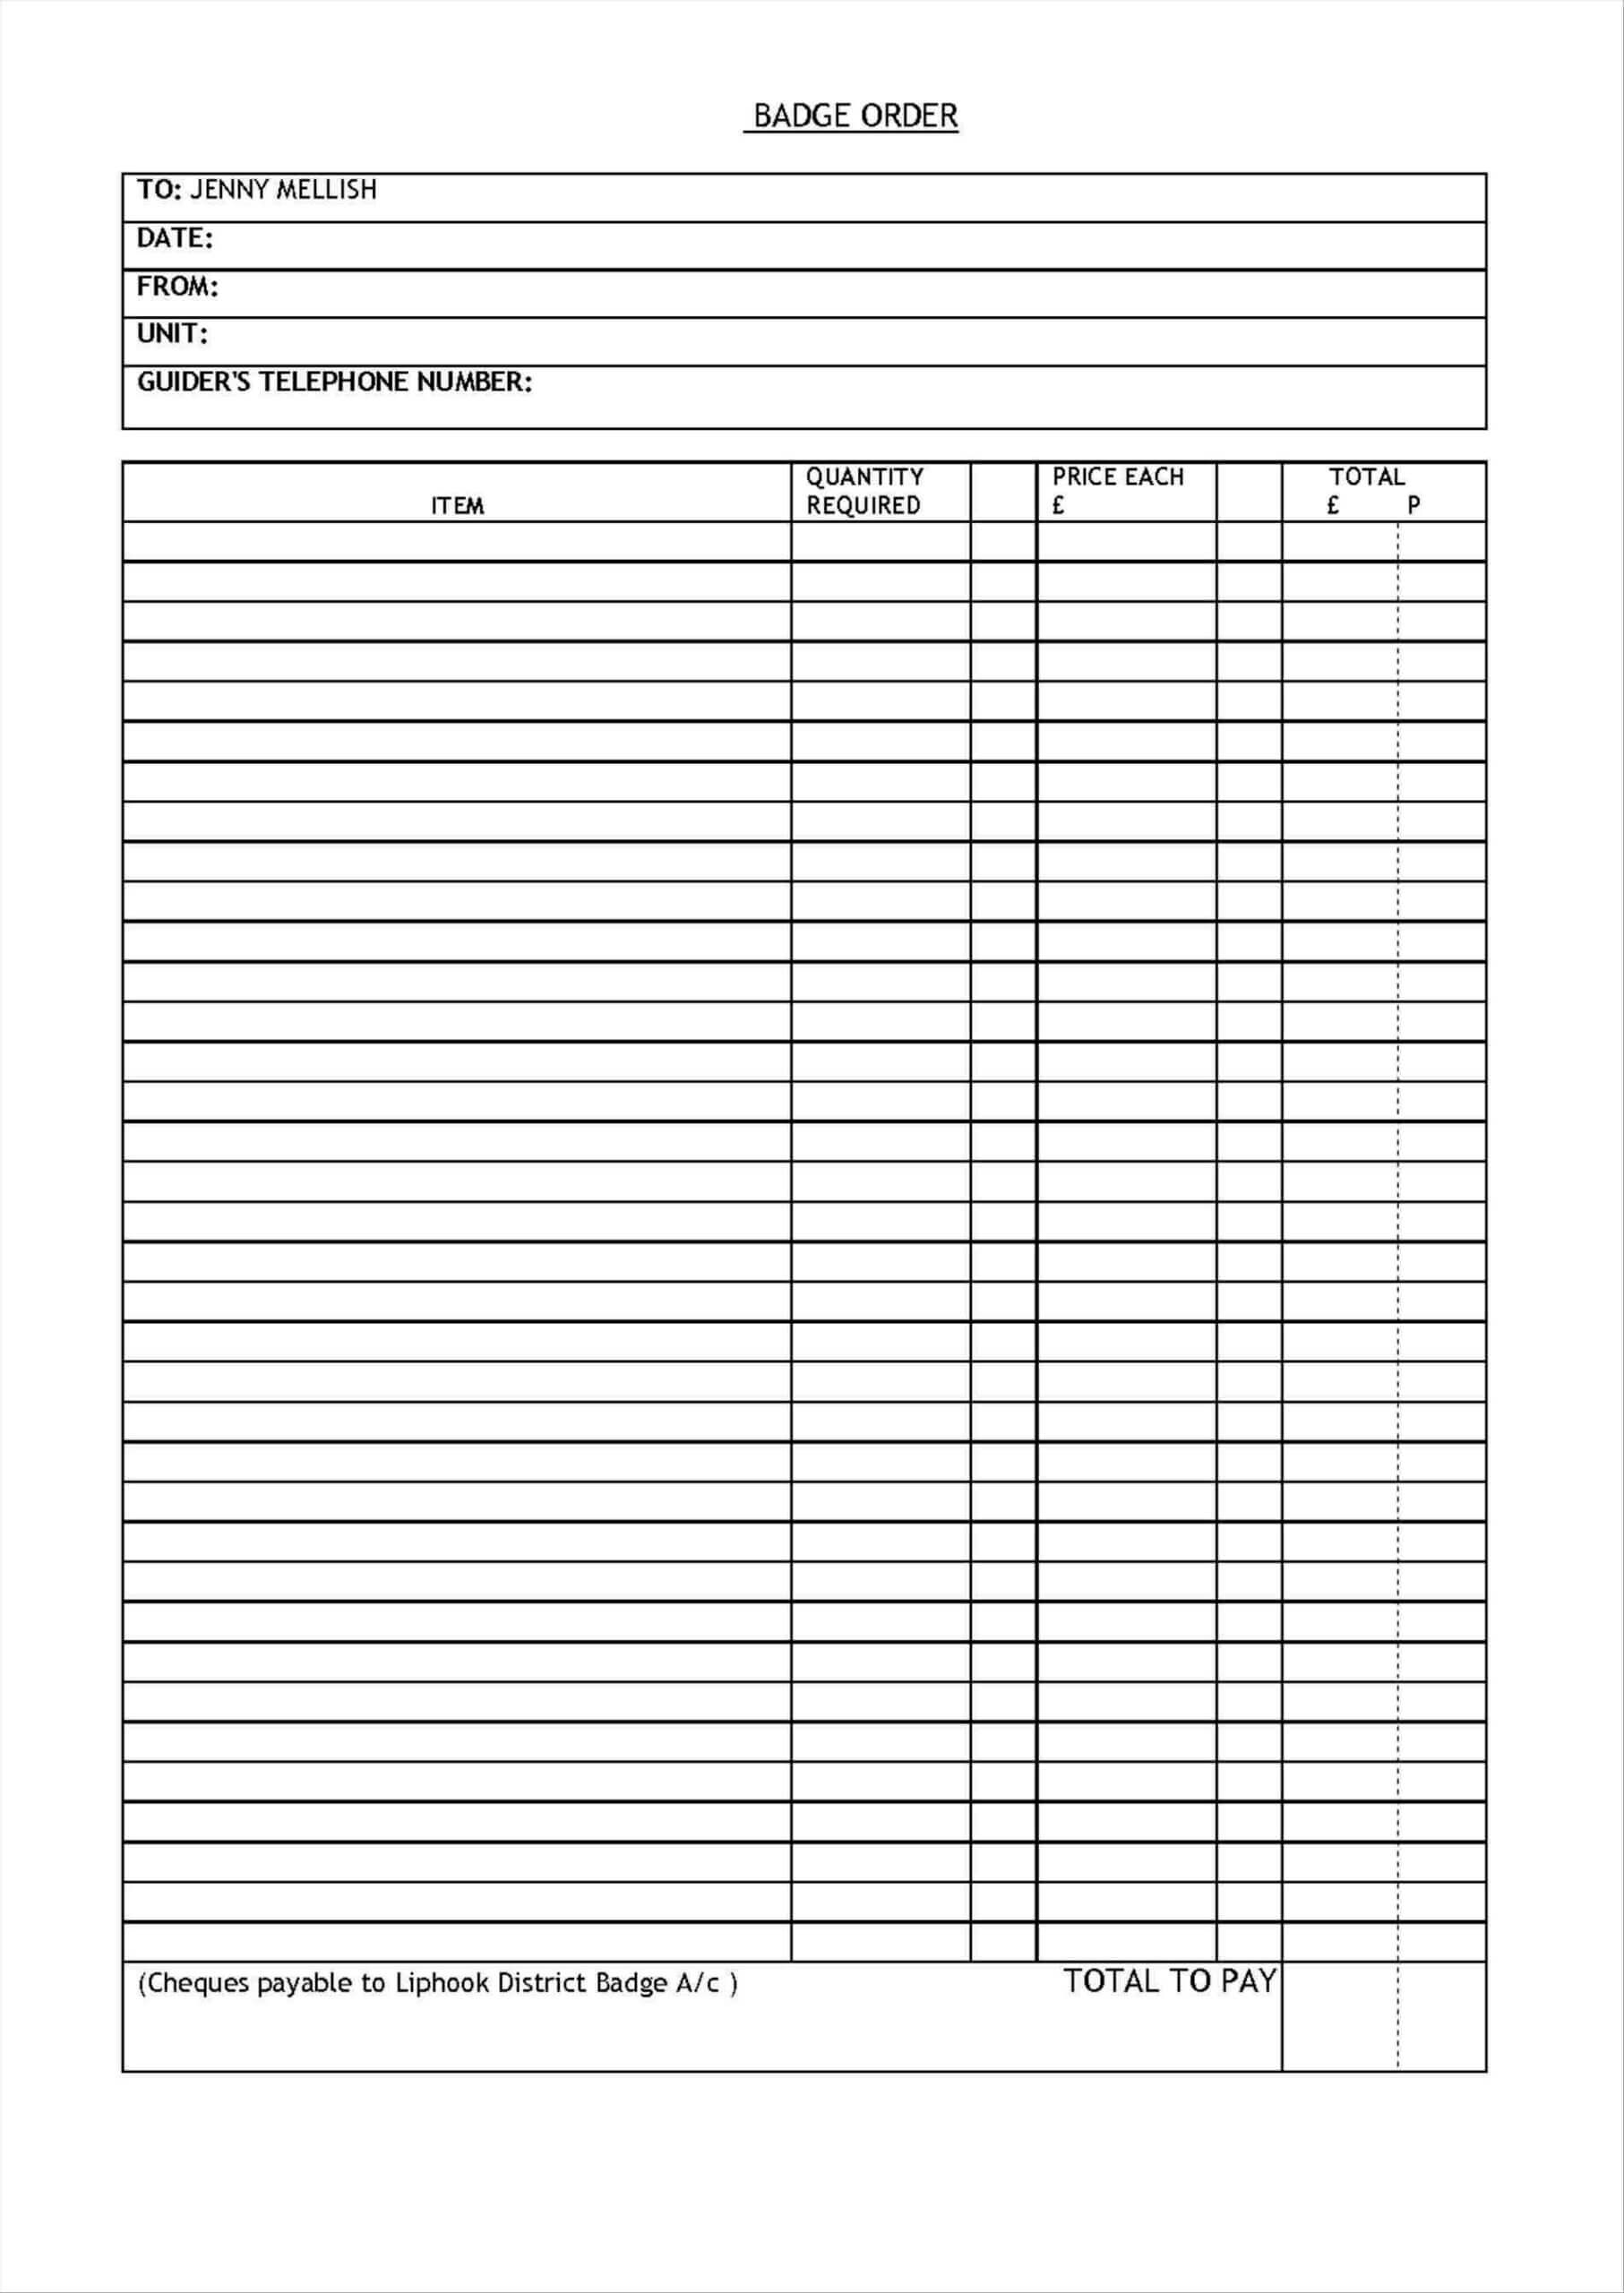 025 Fundraiser Order Form Template Excel Ideas Fantastic Throughout Blank Fundraiser Order Form Template